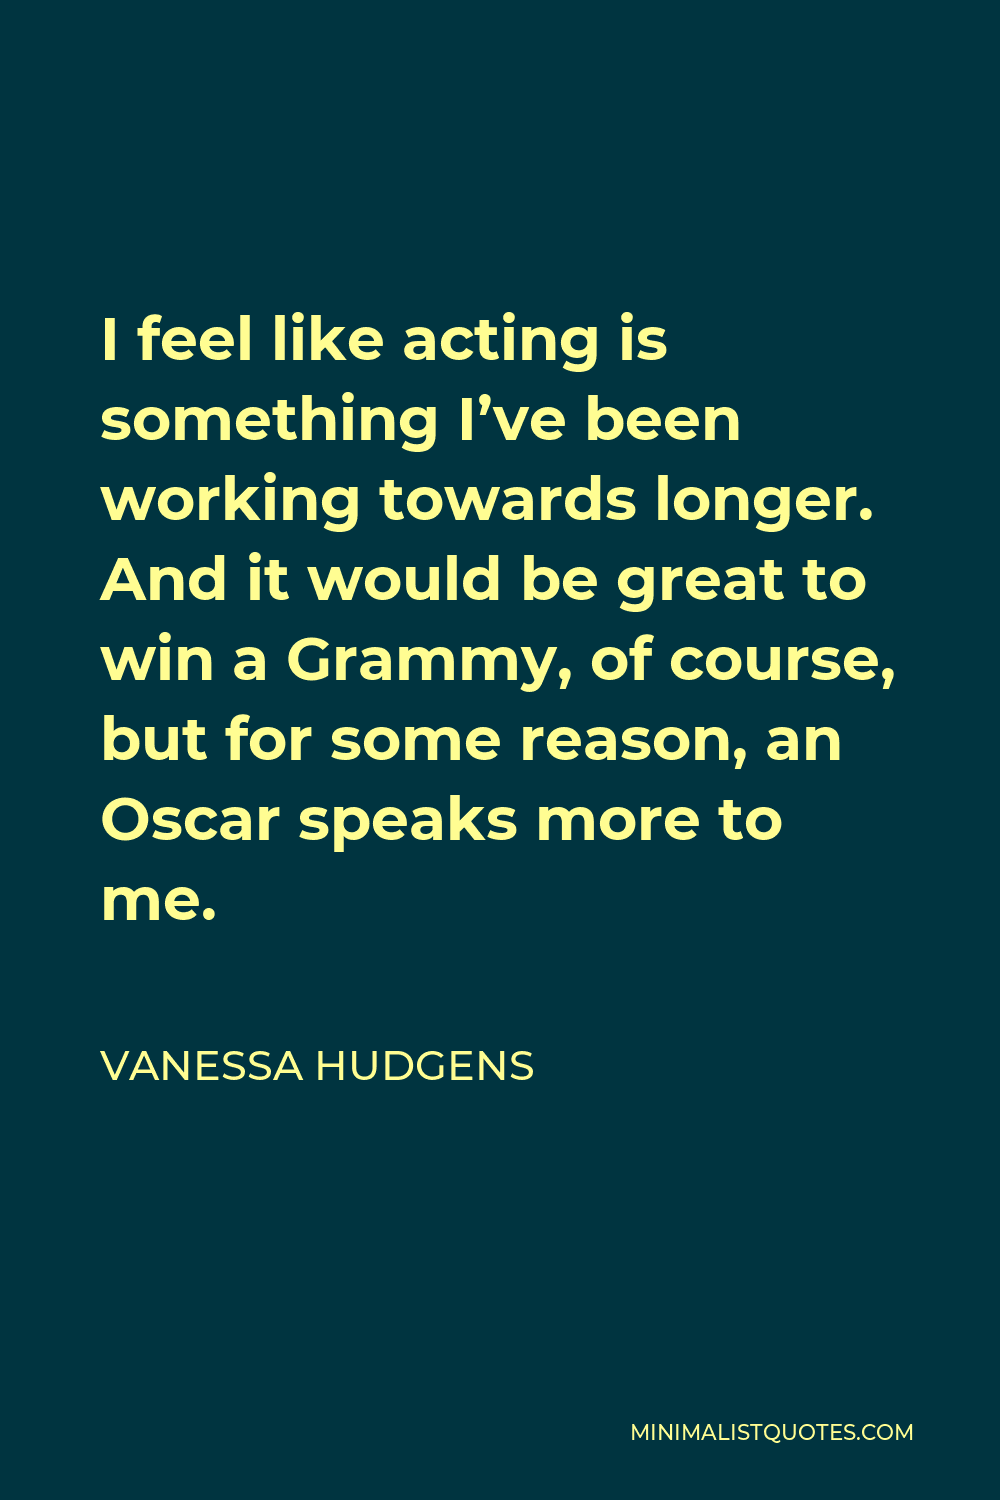 Vanessa Hudgens Quote - I feel like acting is something I’ve been working towards longer. And it would be great to win a Grammy, of course, but for some reason, an Oscar speaks more to me.